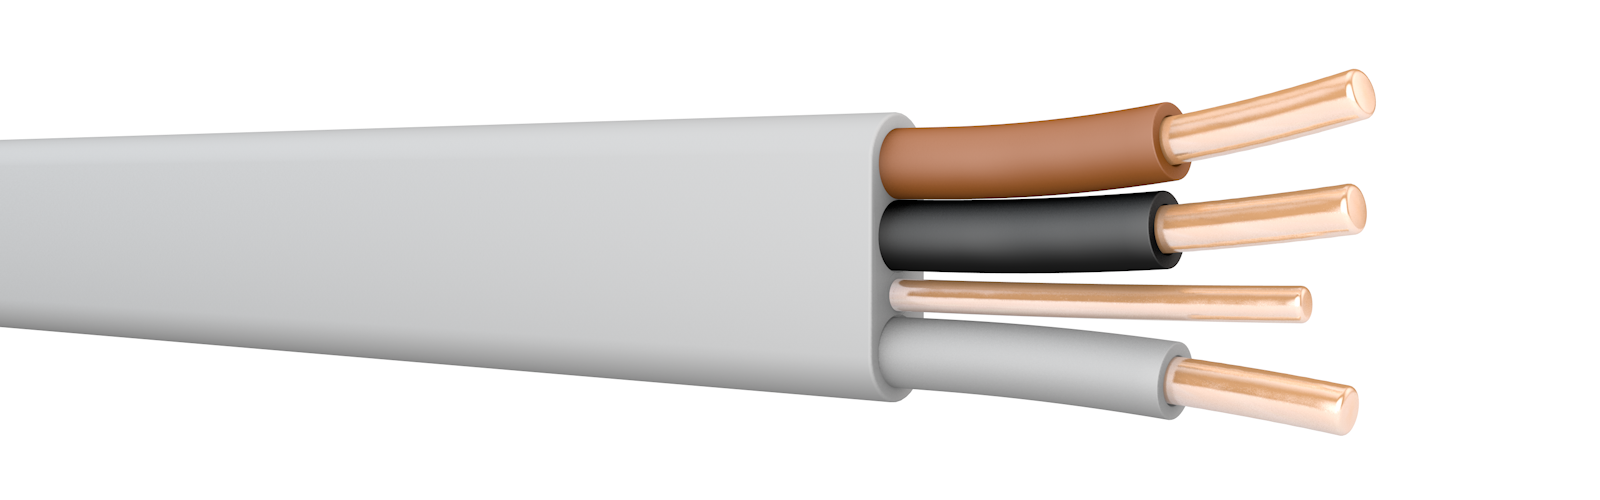 Prysmian 6243Y: 3-core PVC cable for lighting and power with bare CPC.